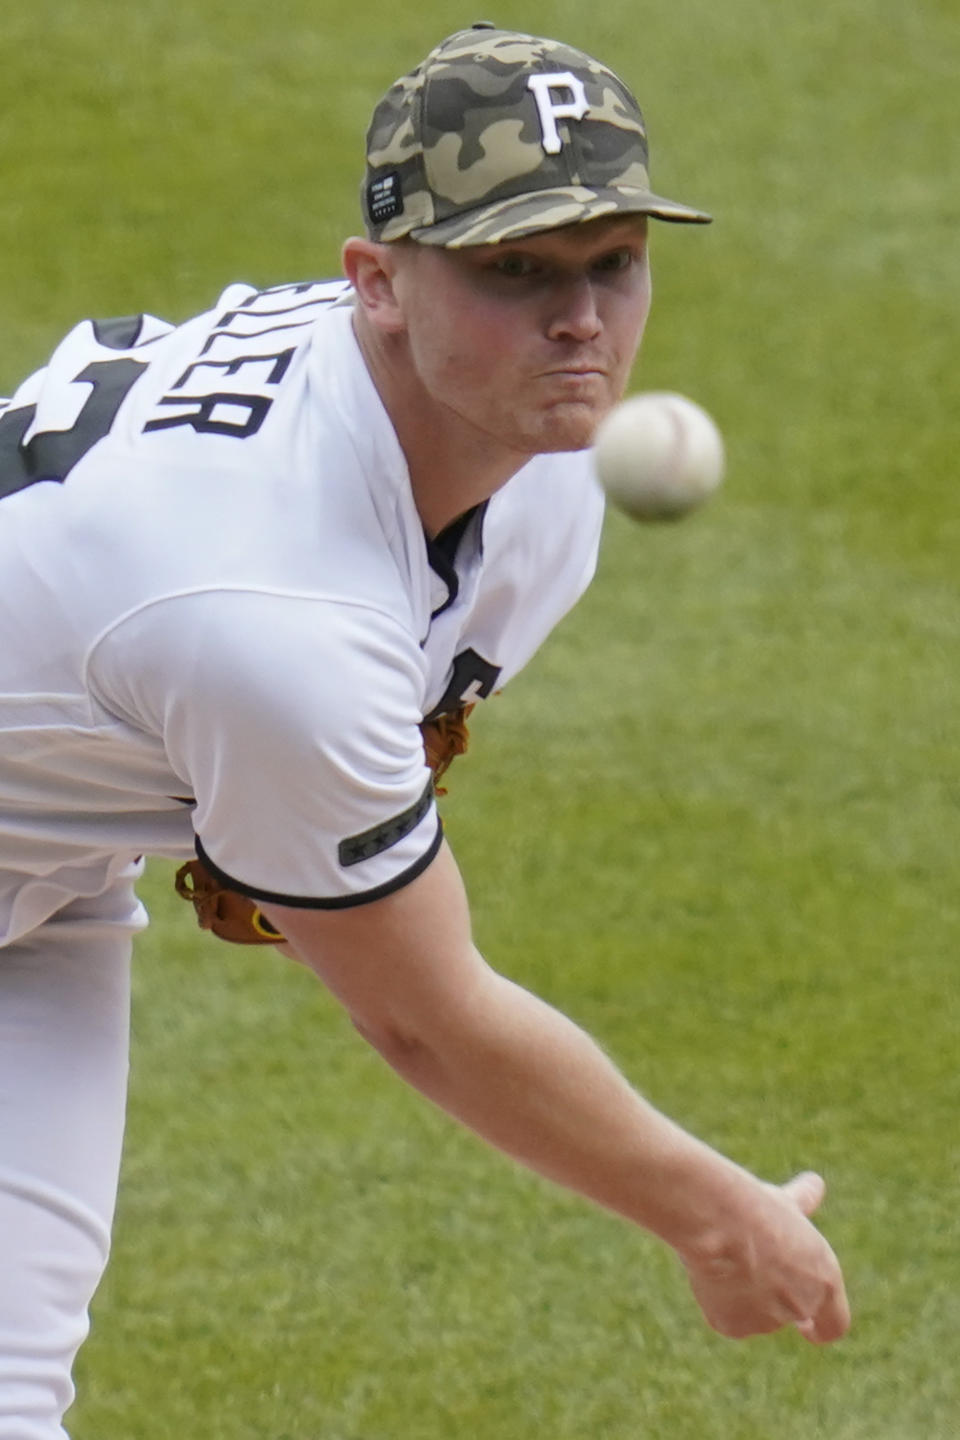 Pittsburgh Pirates starting pitcher Mitch Keller throws against the San Francisco Giants in the fifth inning of a baseball game, Sunday, May 16, 2021, in Pittsburgh. (AP Photo/Keith Srakocic)